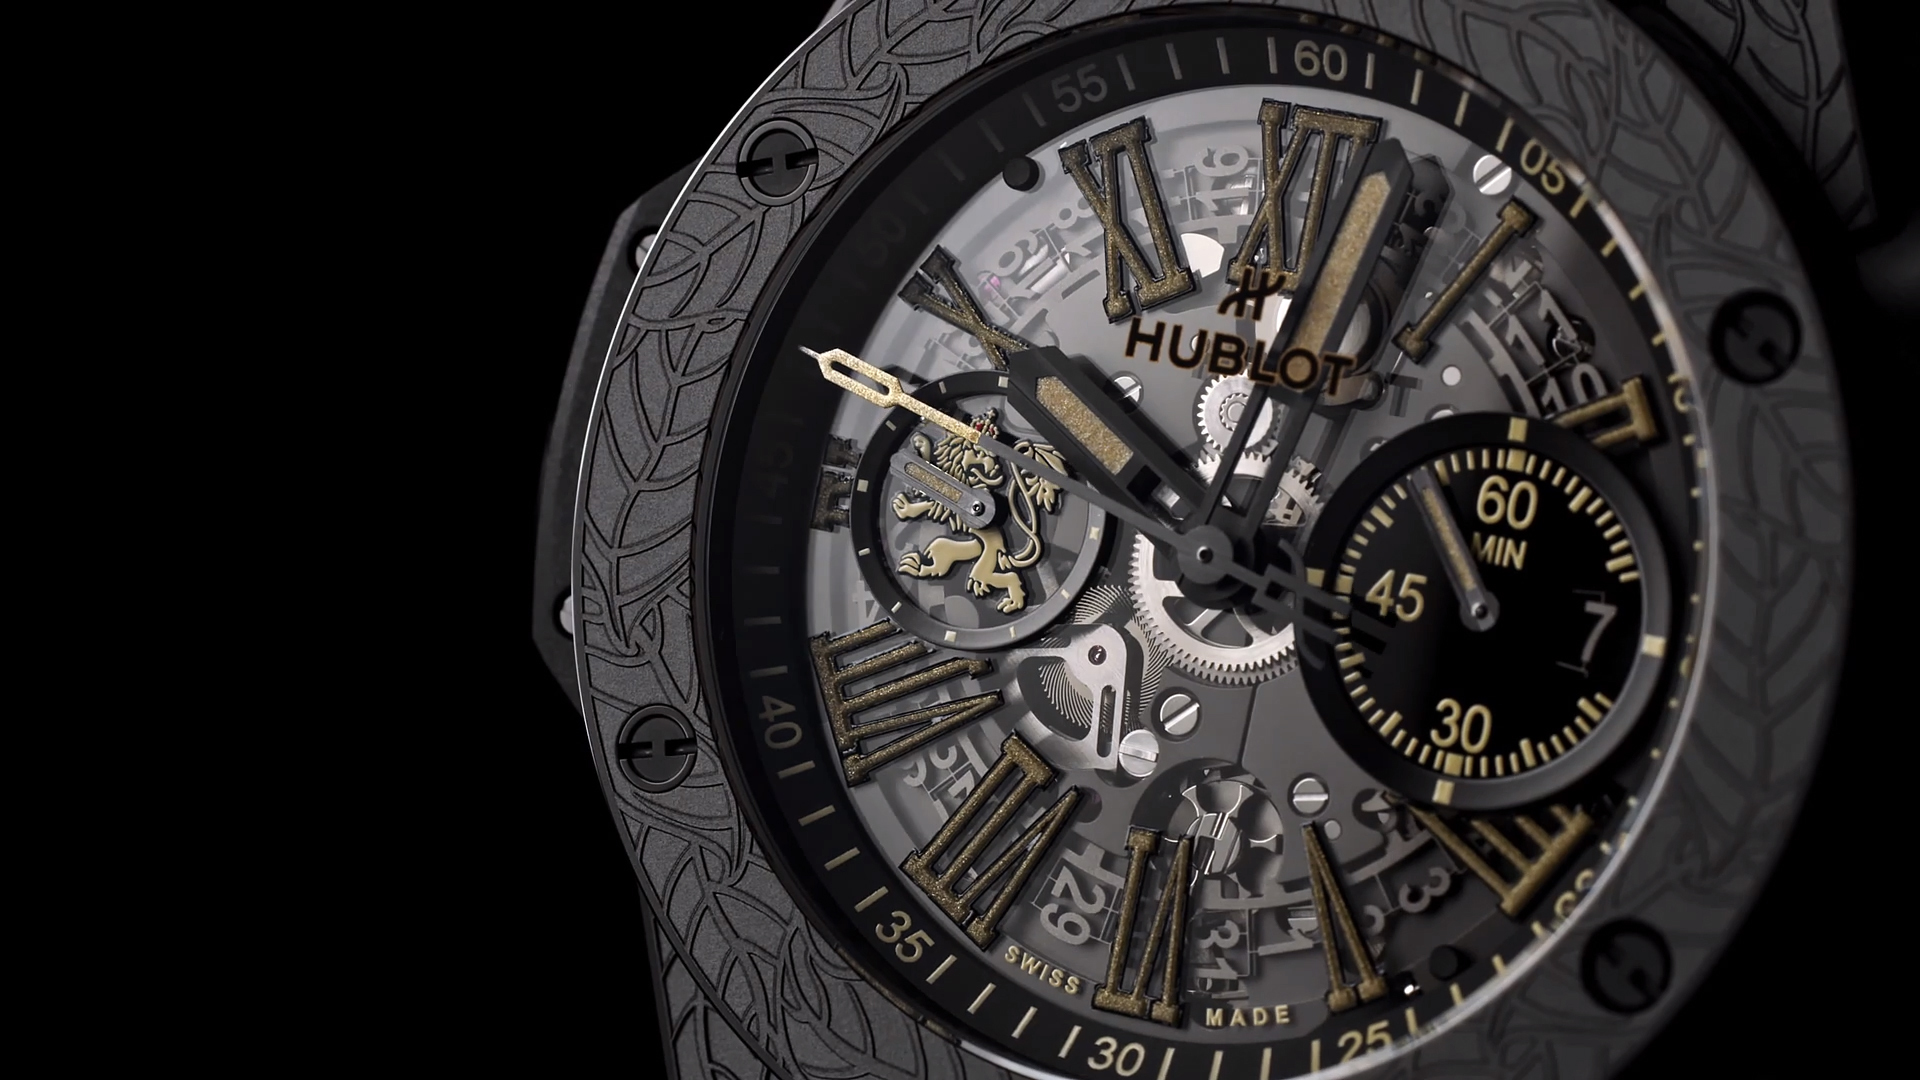 Hublot and Fuente Team Up for Another Limited-Edition Big Bang Unico  Honoring the First Family of Cigars